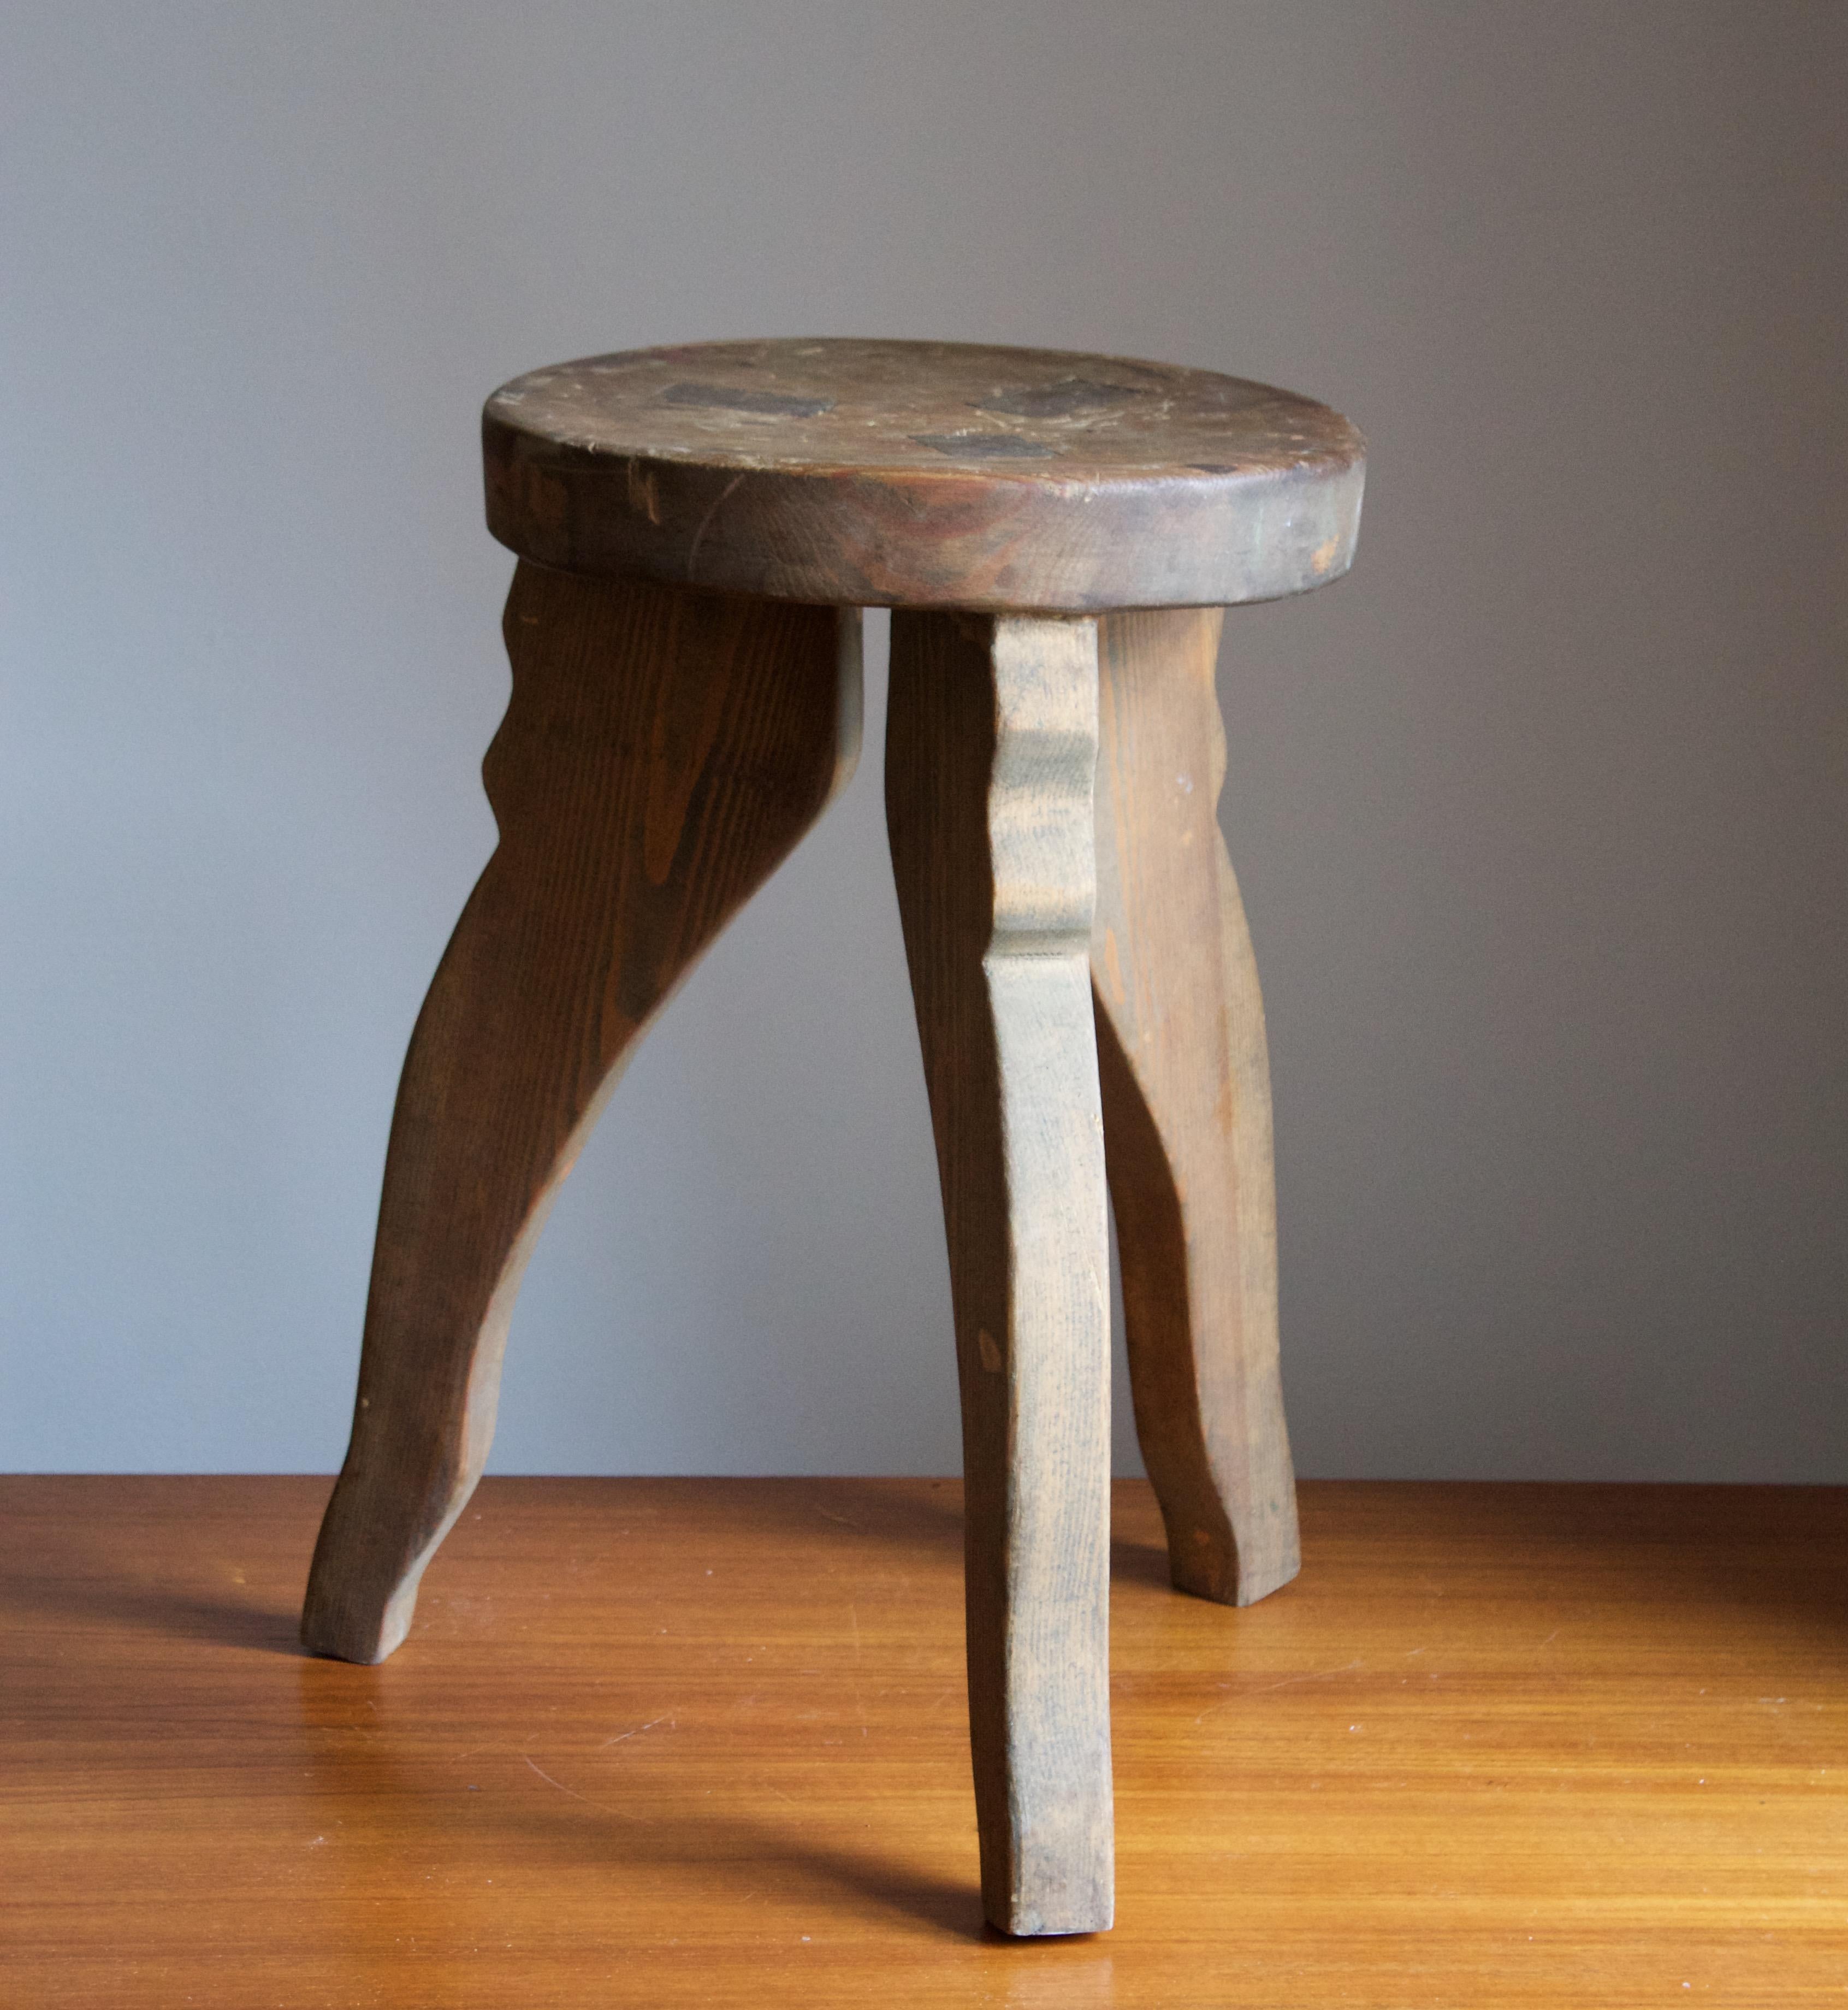 A free-form stool or side table. Maker unknown. Sweden, c. 1940s.